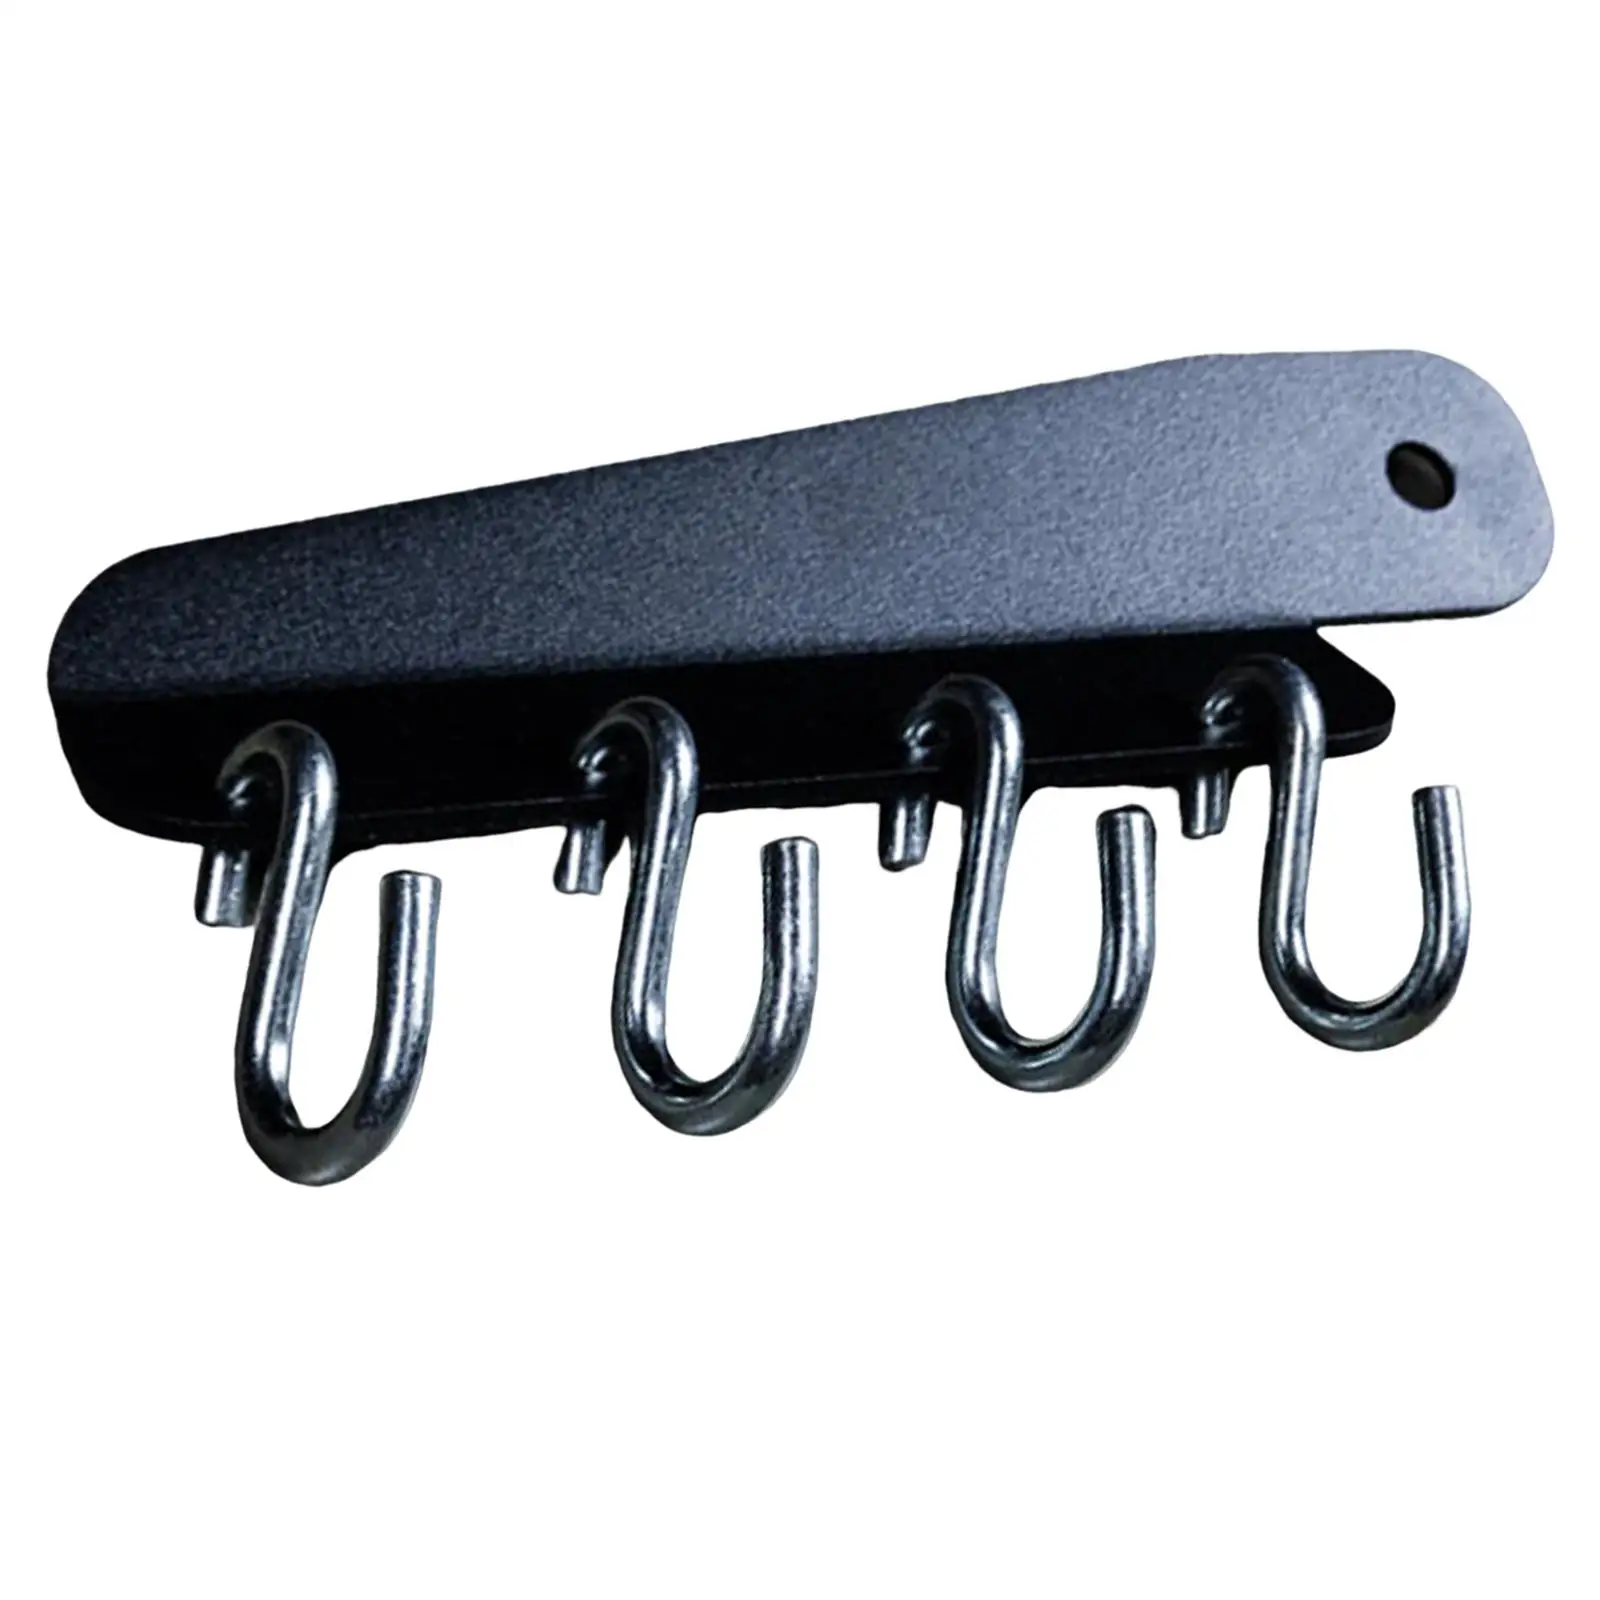 Gym Chains Rack Storage Holder Hanging Wall Mount Hanger for